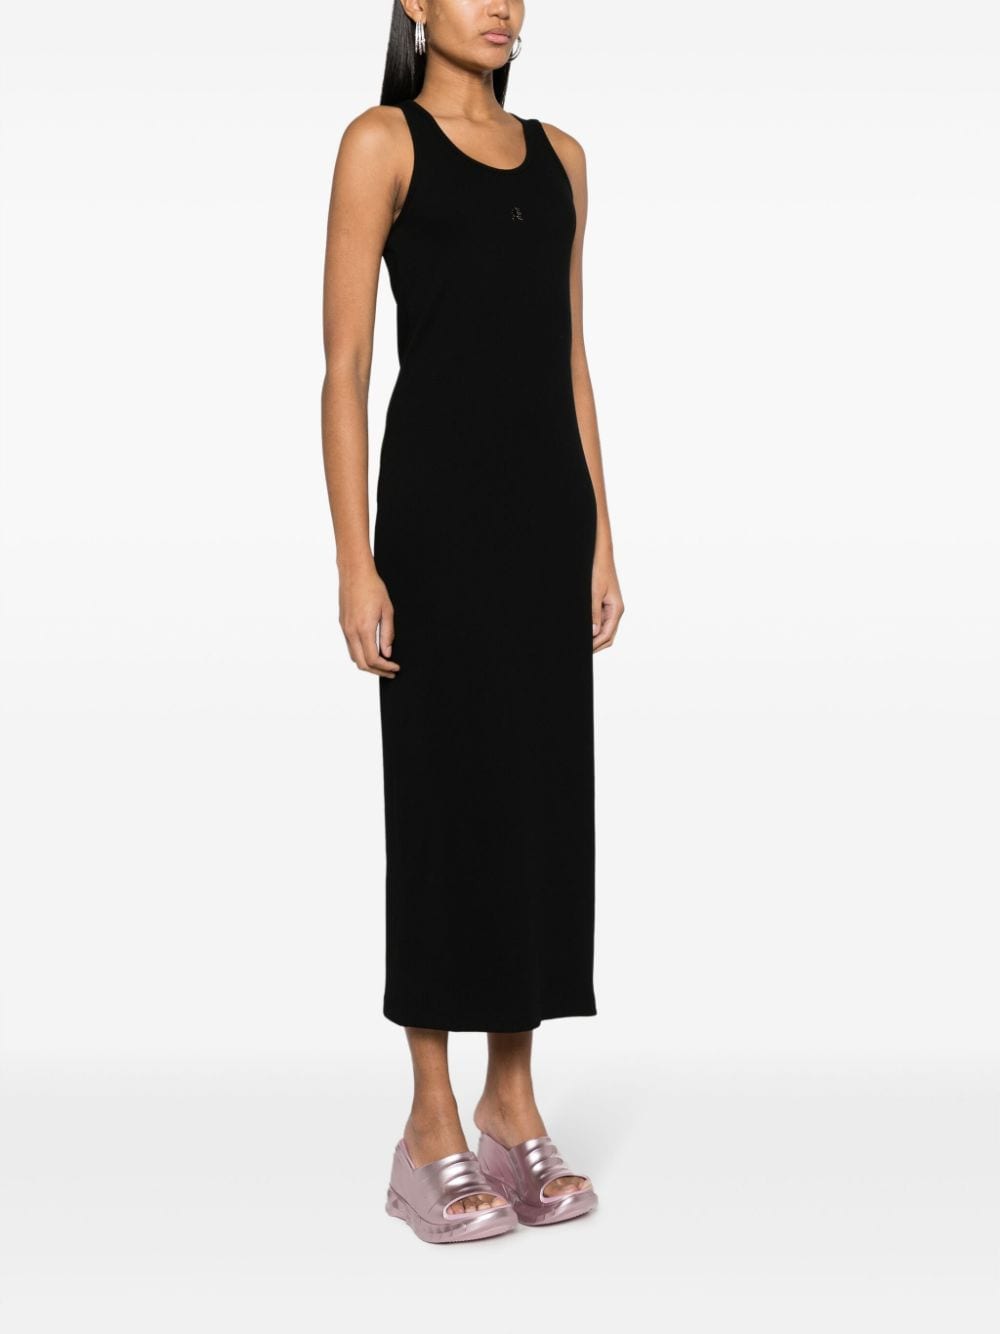 4G-plaque ribbed-knit maxi dress<BR/><BR/><BR/>